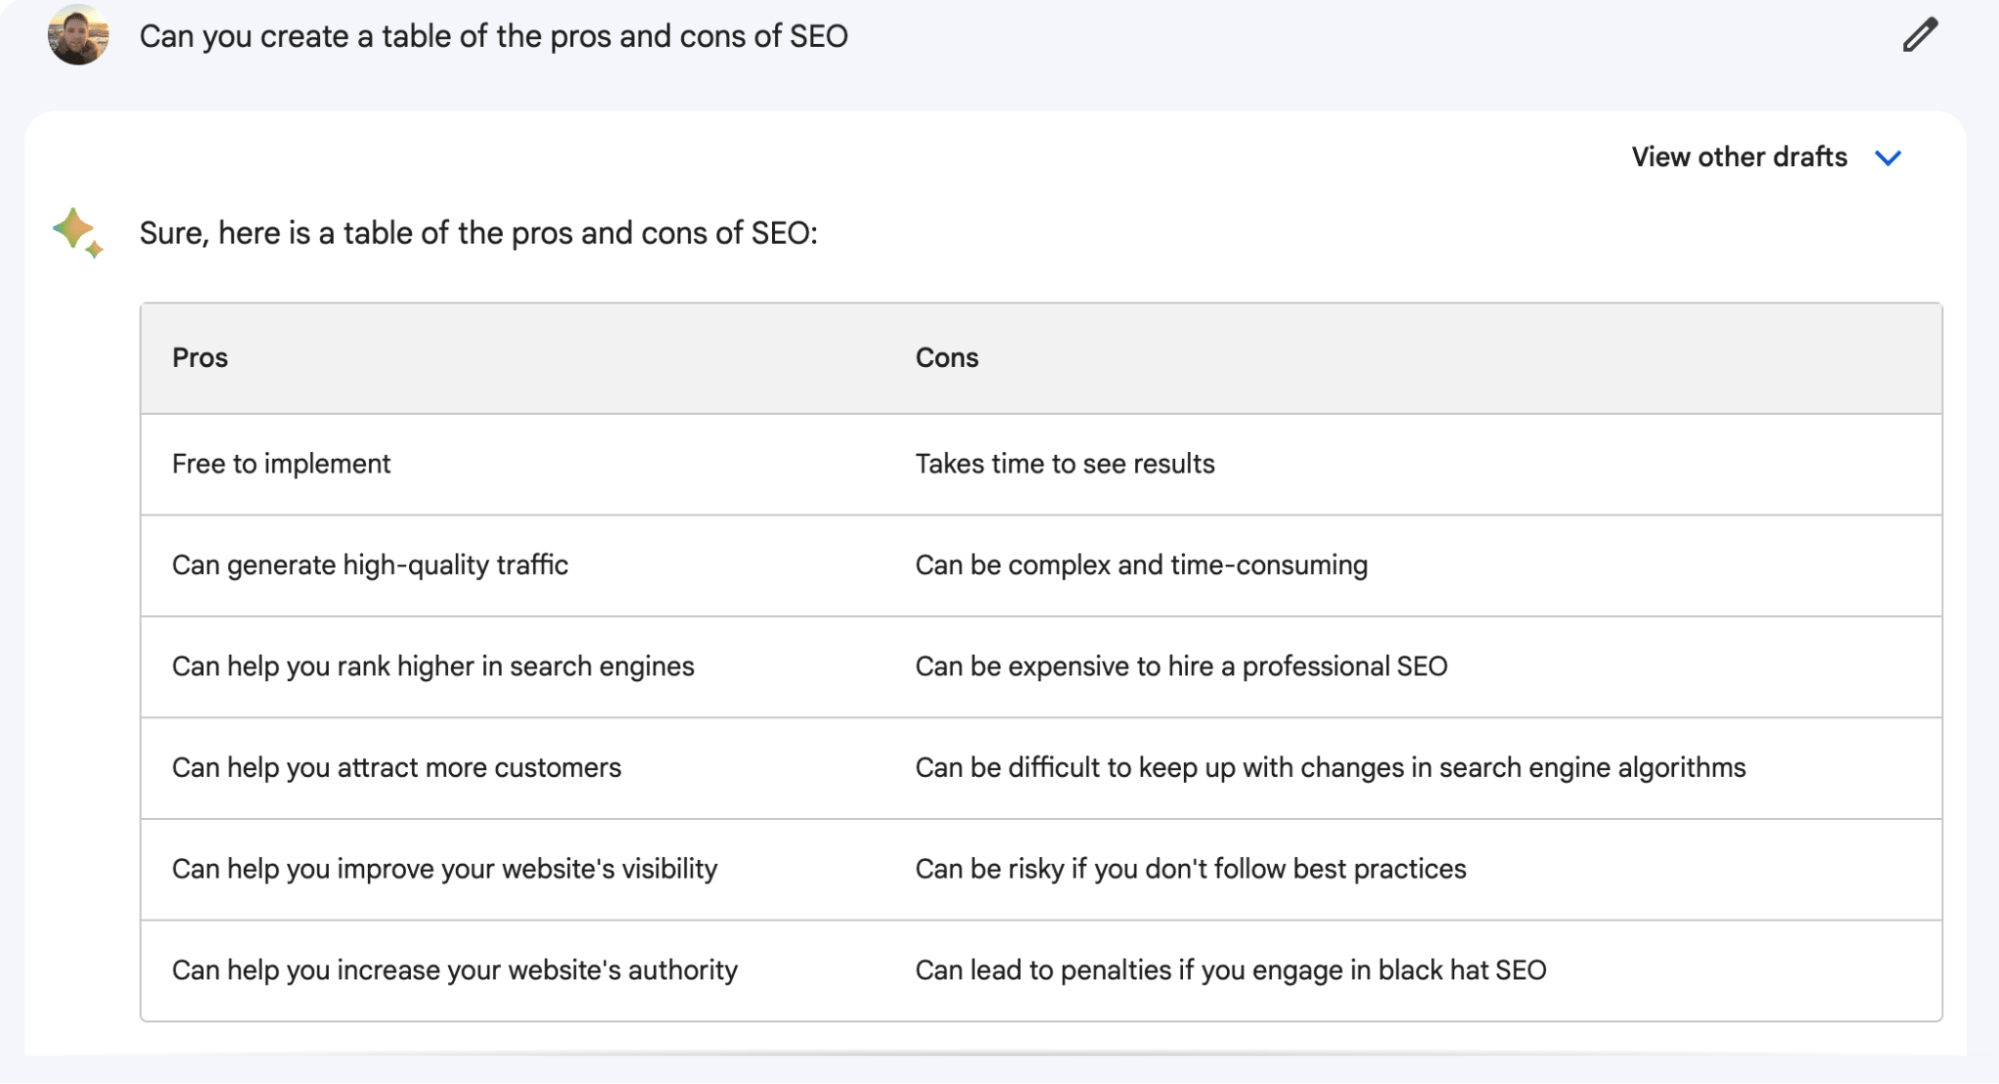 Asking Google Bard for the pros and cons of SEO 
